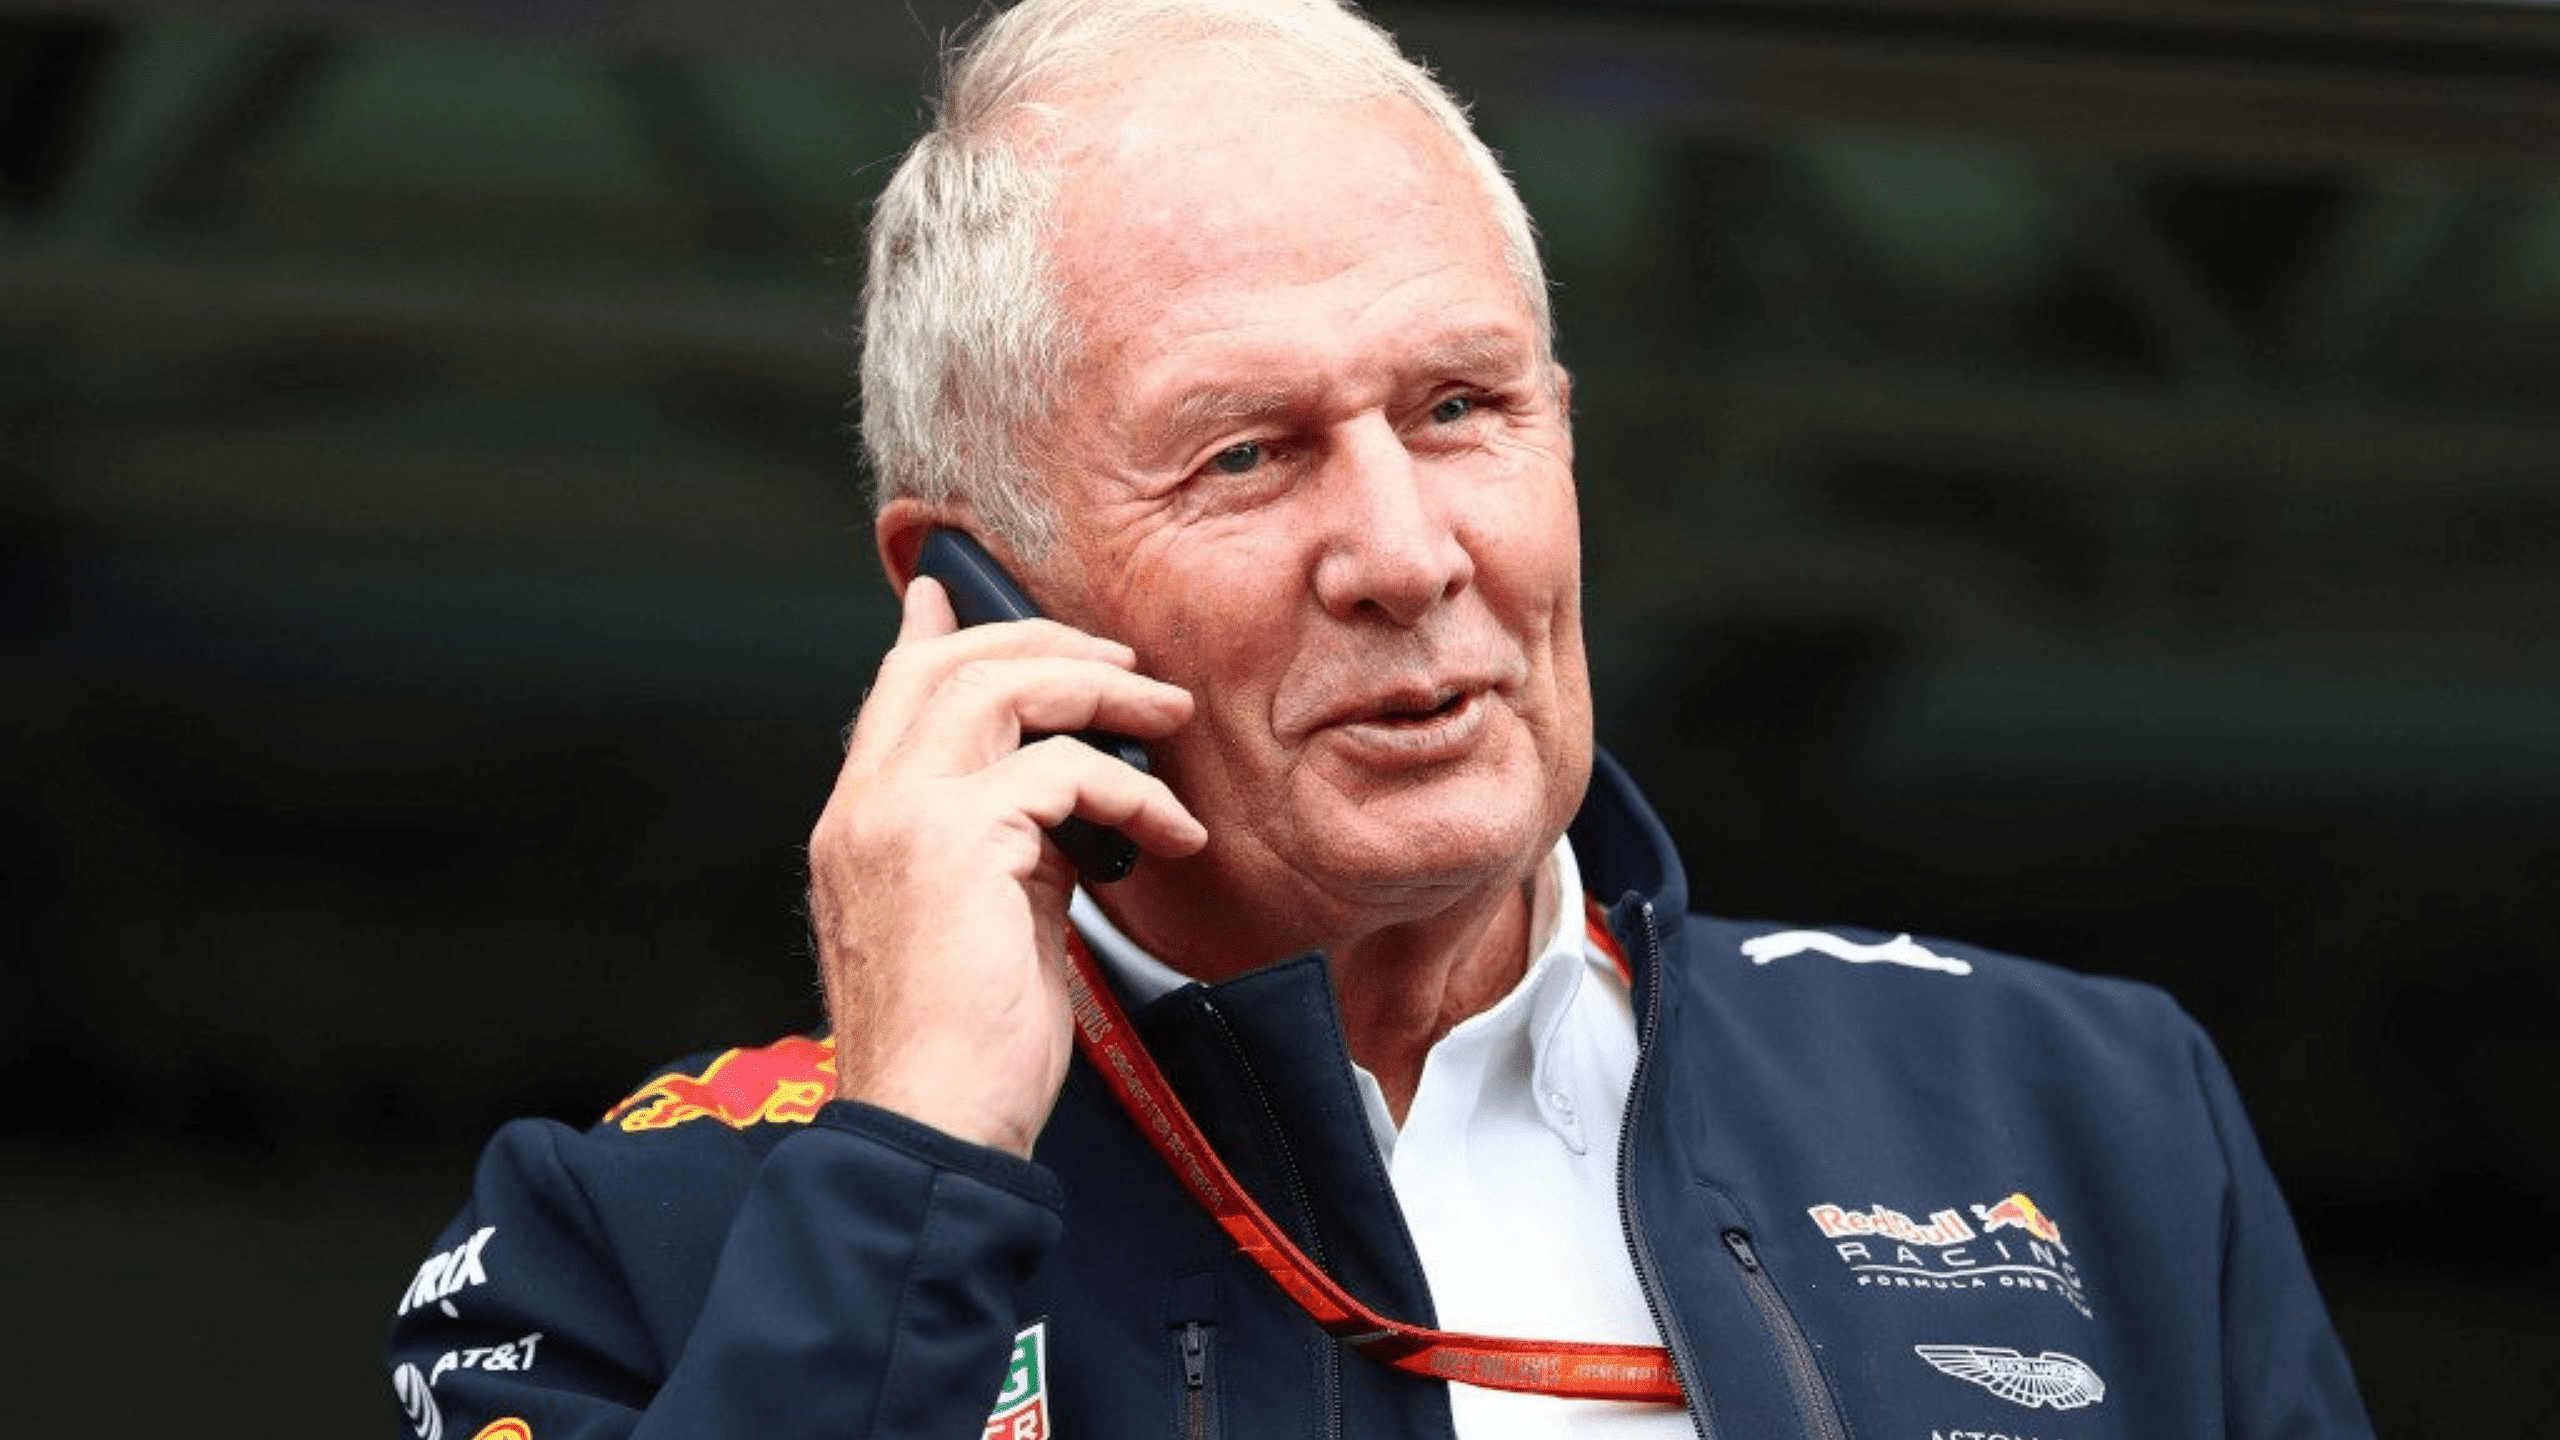 Sergio Perez to Red Bull: Dr. Helmut Marko sent Mexican driver congratulatory message after Sakhir GP win